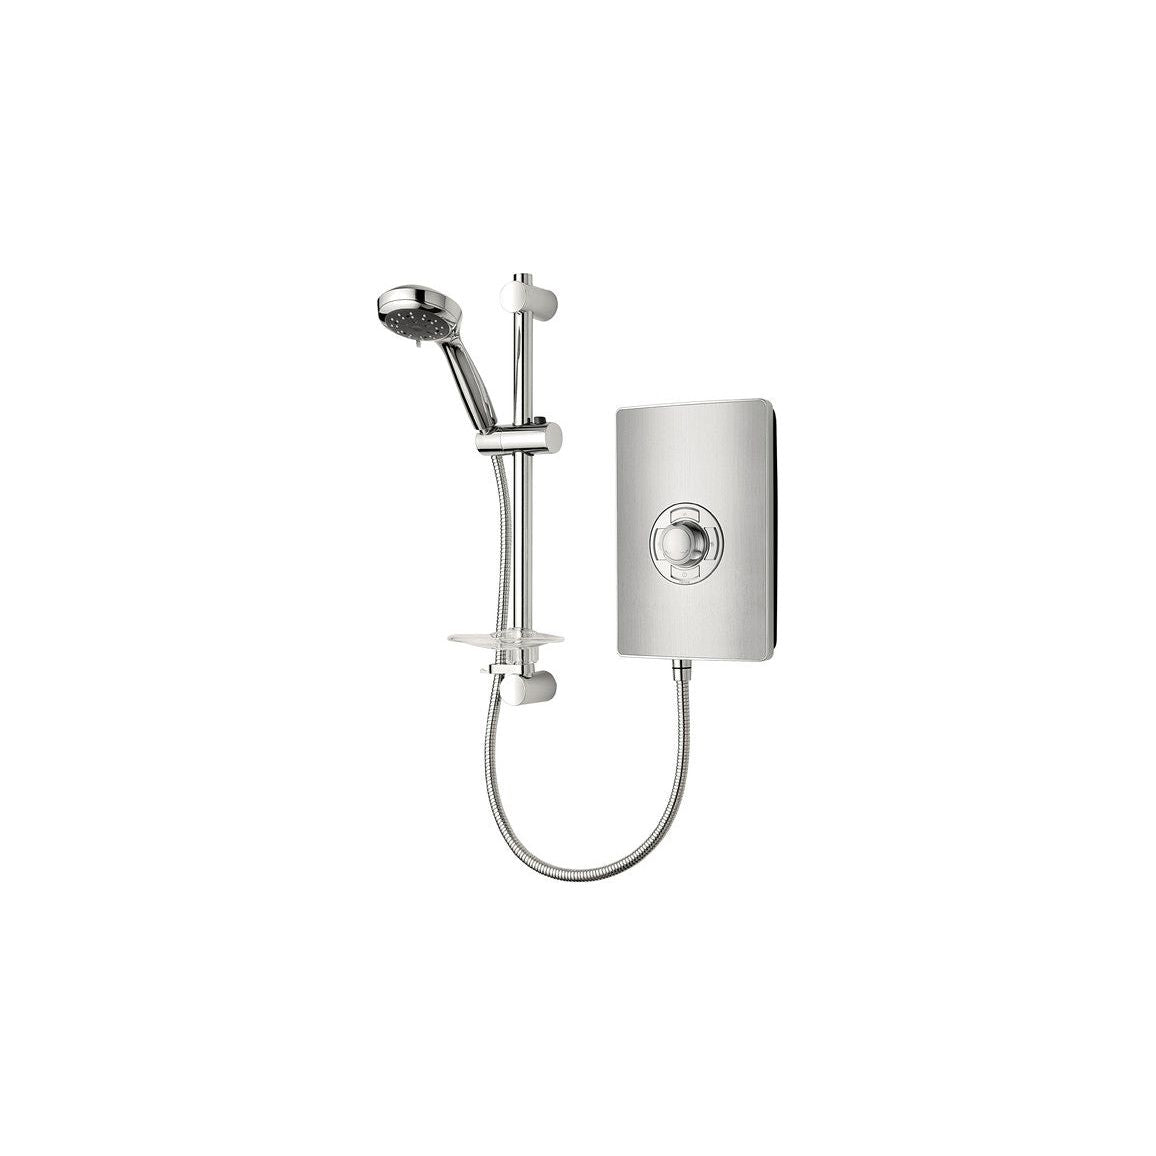 Triton Aspirante 9.5kW Contemporary Electric Shower - Brushed Steel